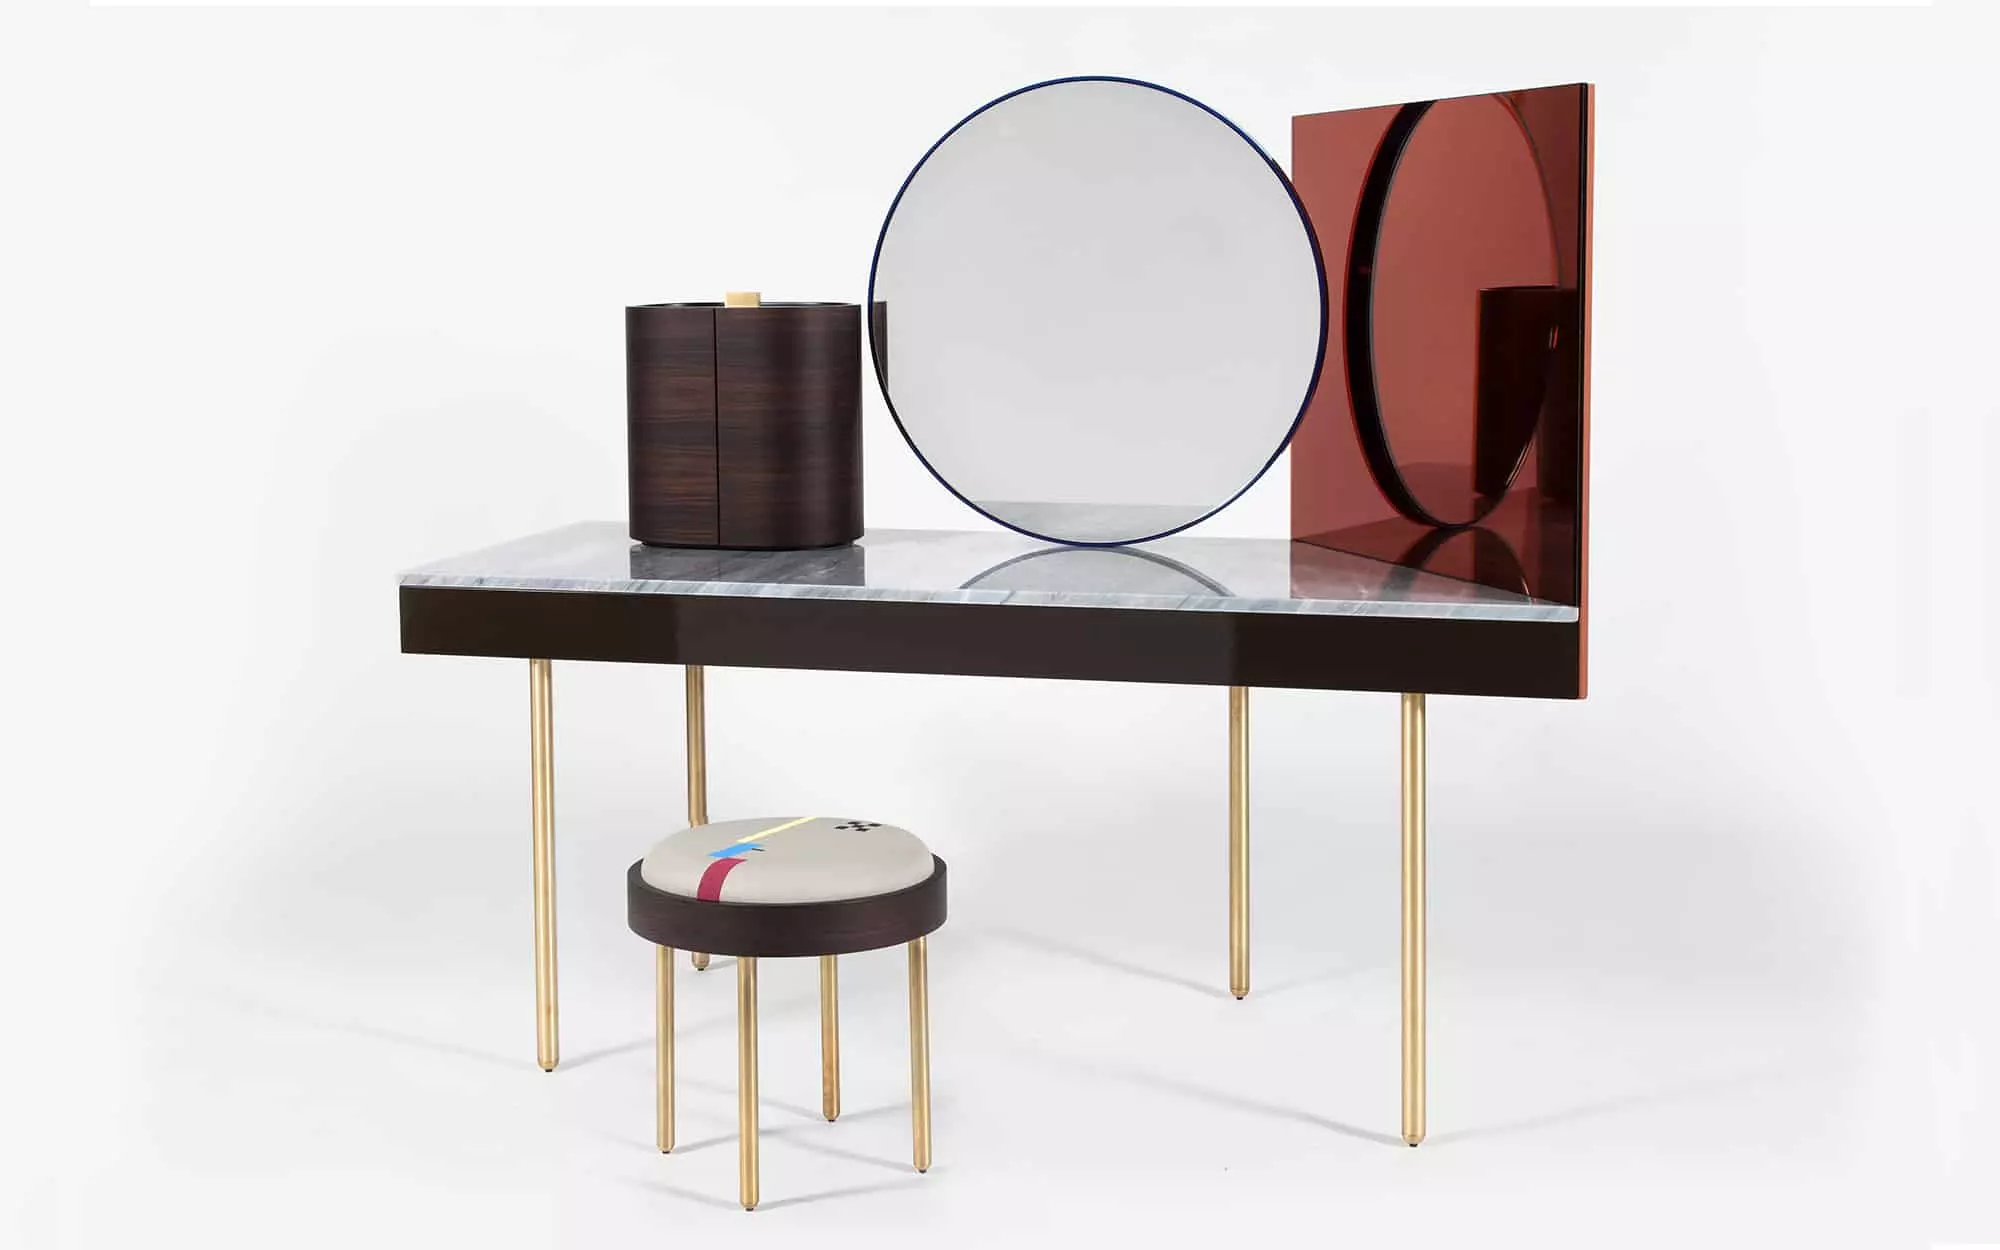 Chandlo Dressing Table - Doshi Levien - Coffee table - Galerie kreo